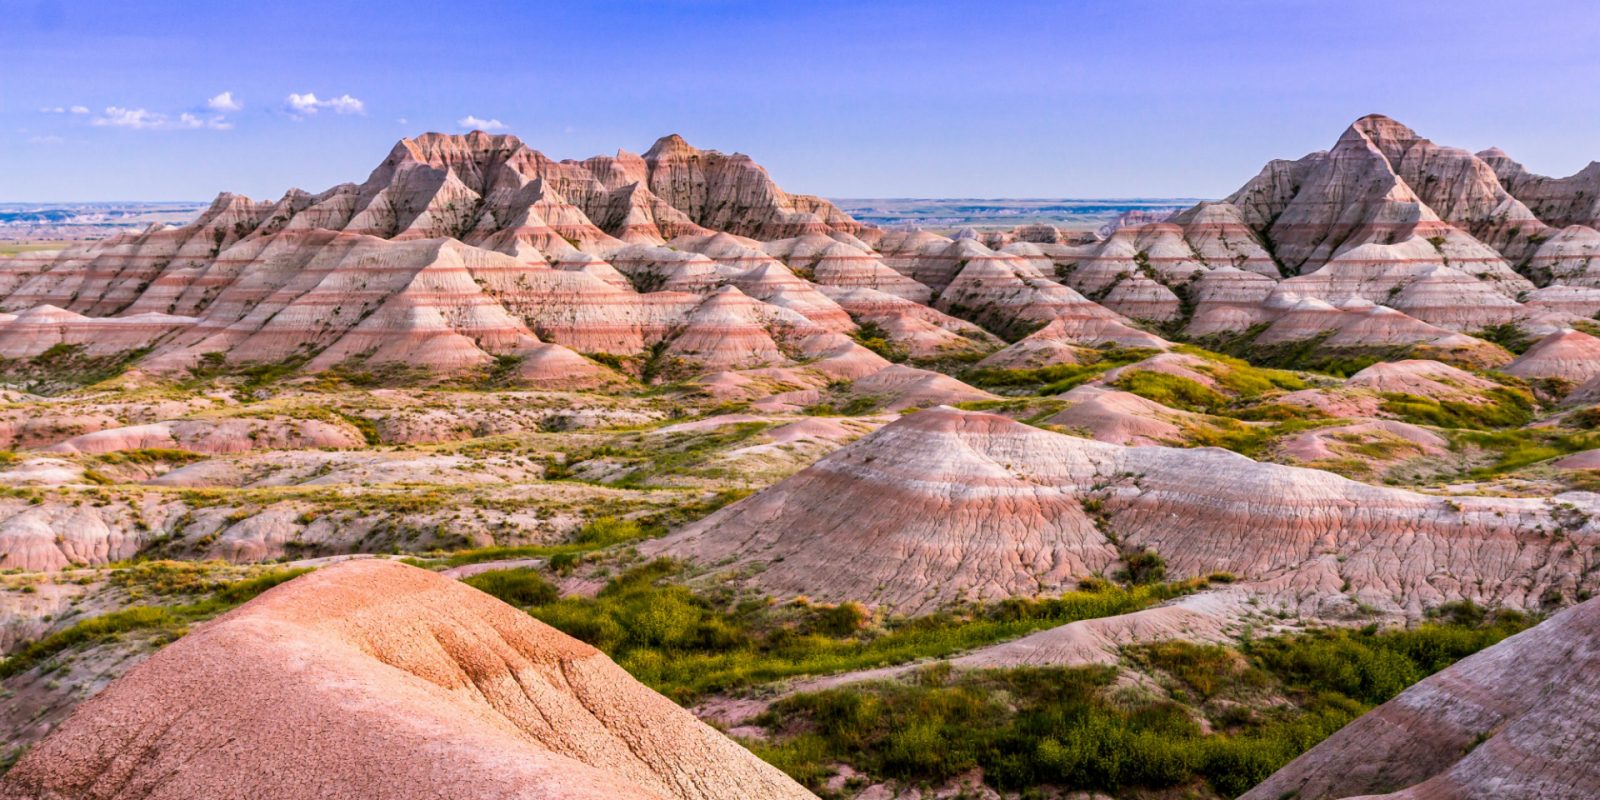 These Questions About US States Were Actually Asked on “Jeopardy!” — Can You Get 12/15? Badlands Np Andreas Eckert Ste Small